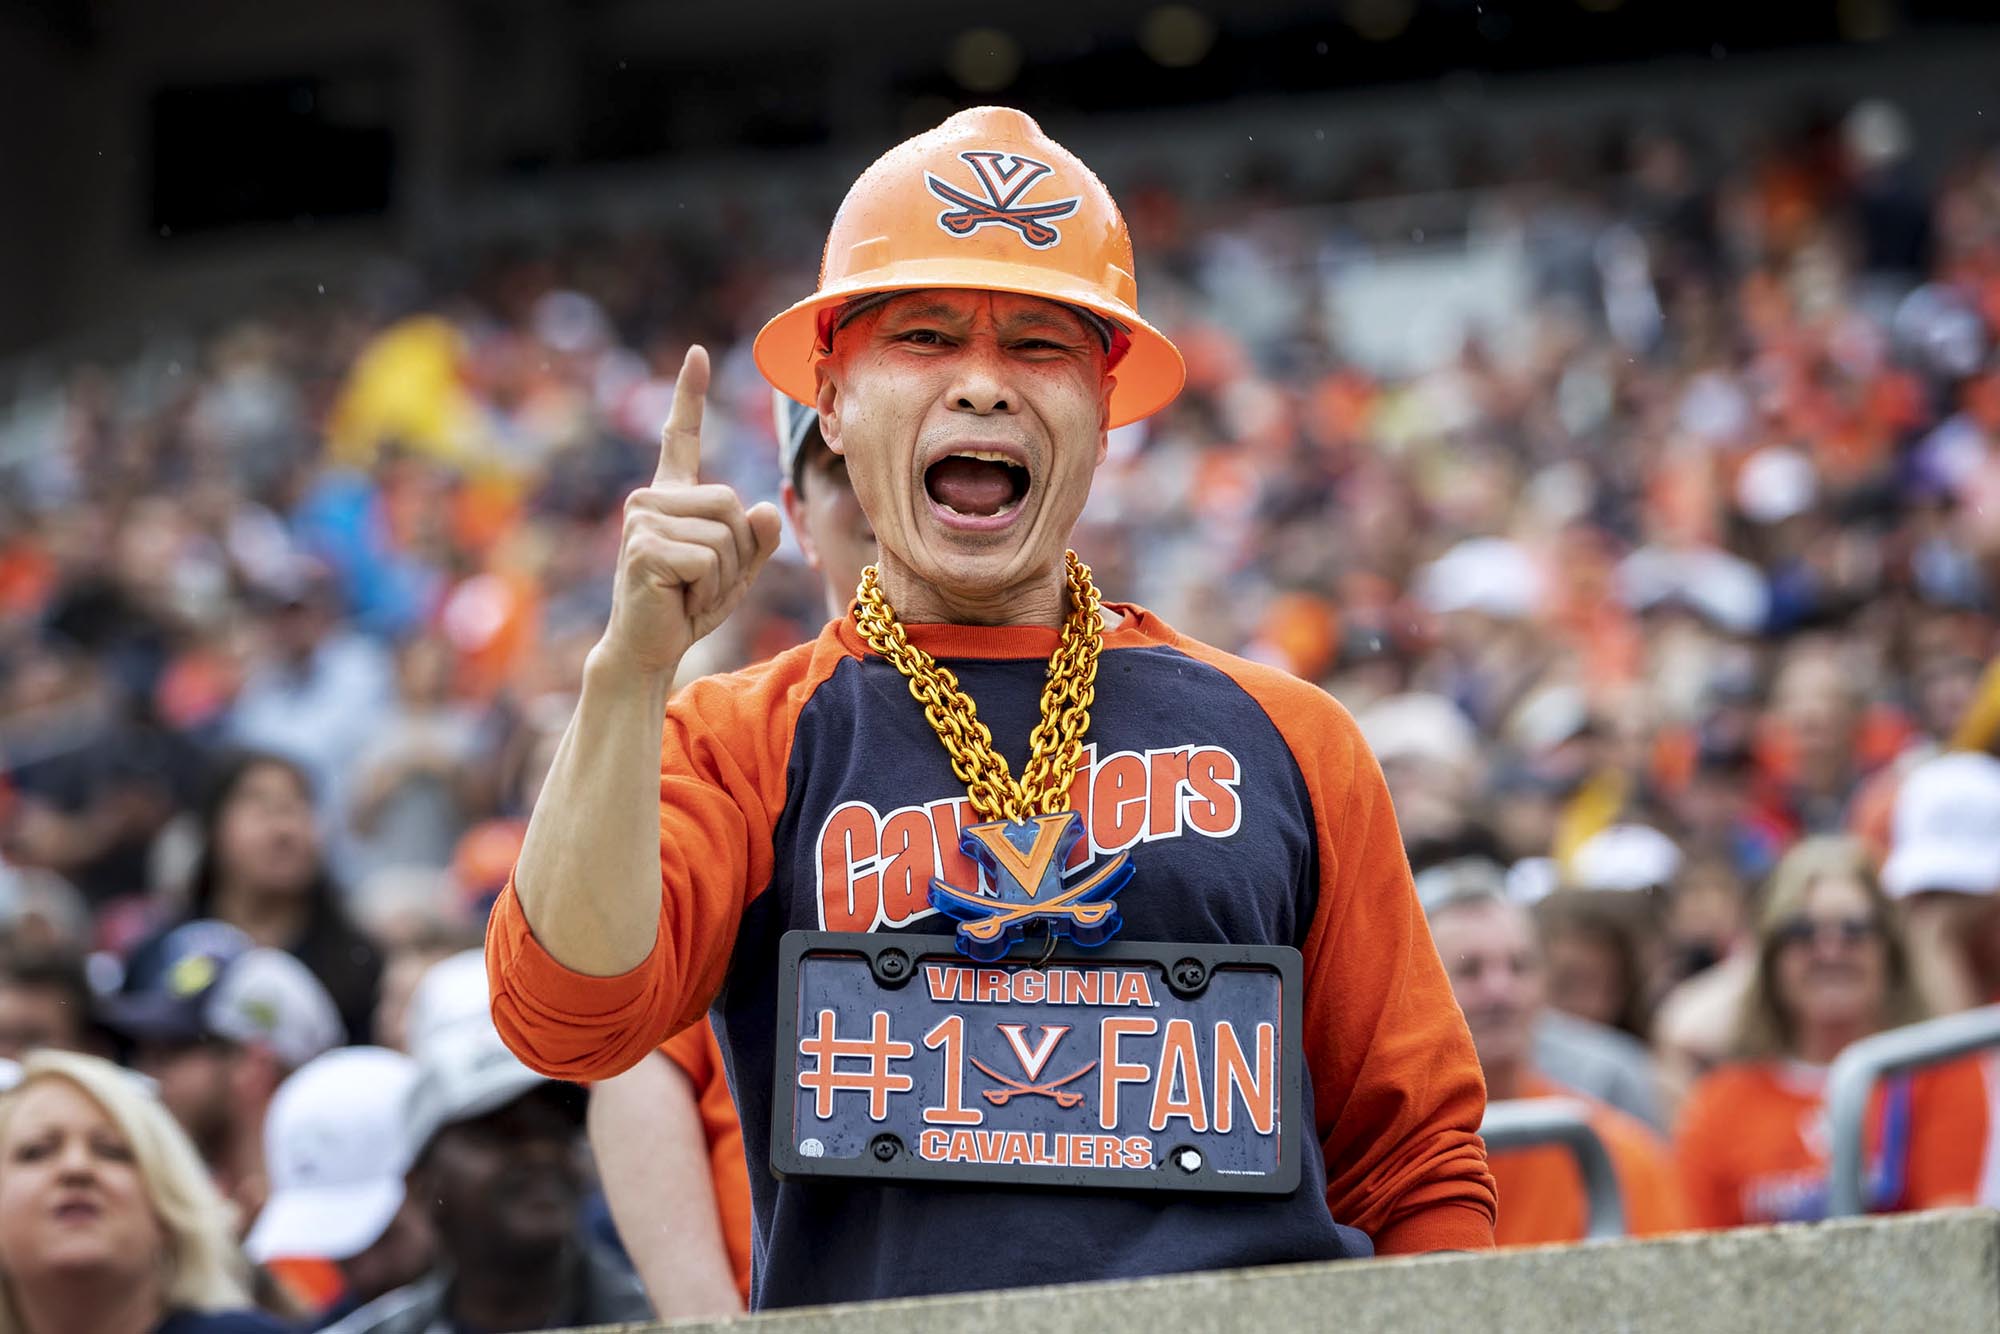 Som Patasomcit decked out in UVA gear screaming during a football game